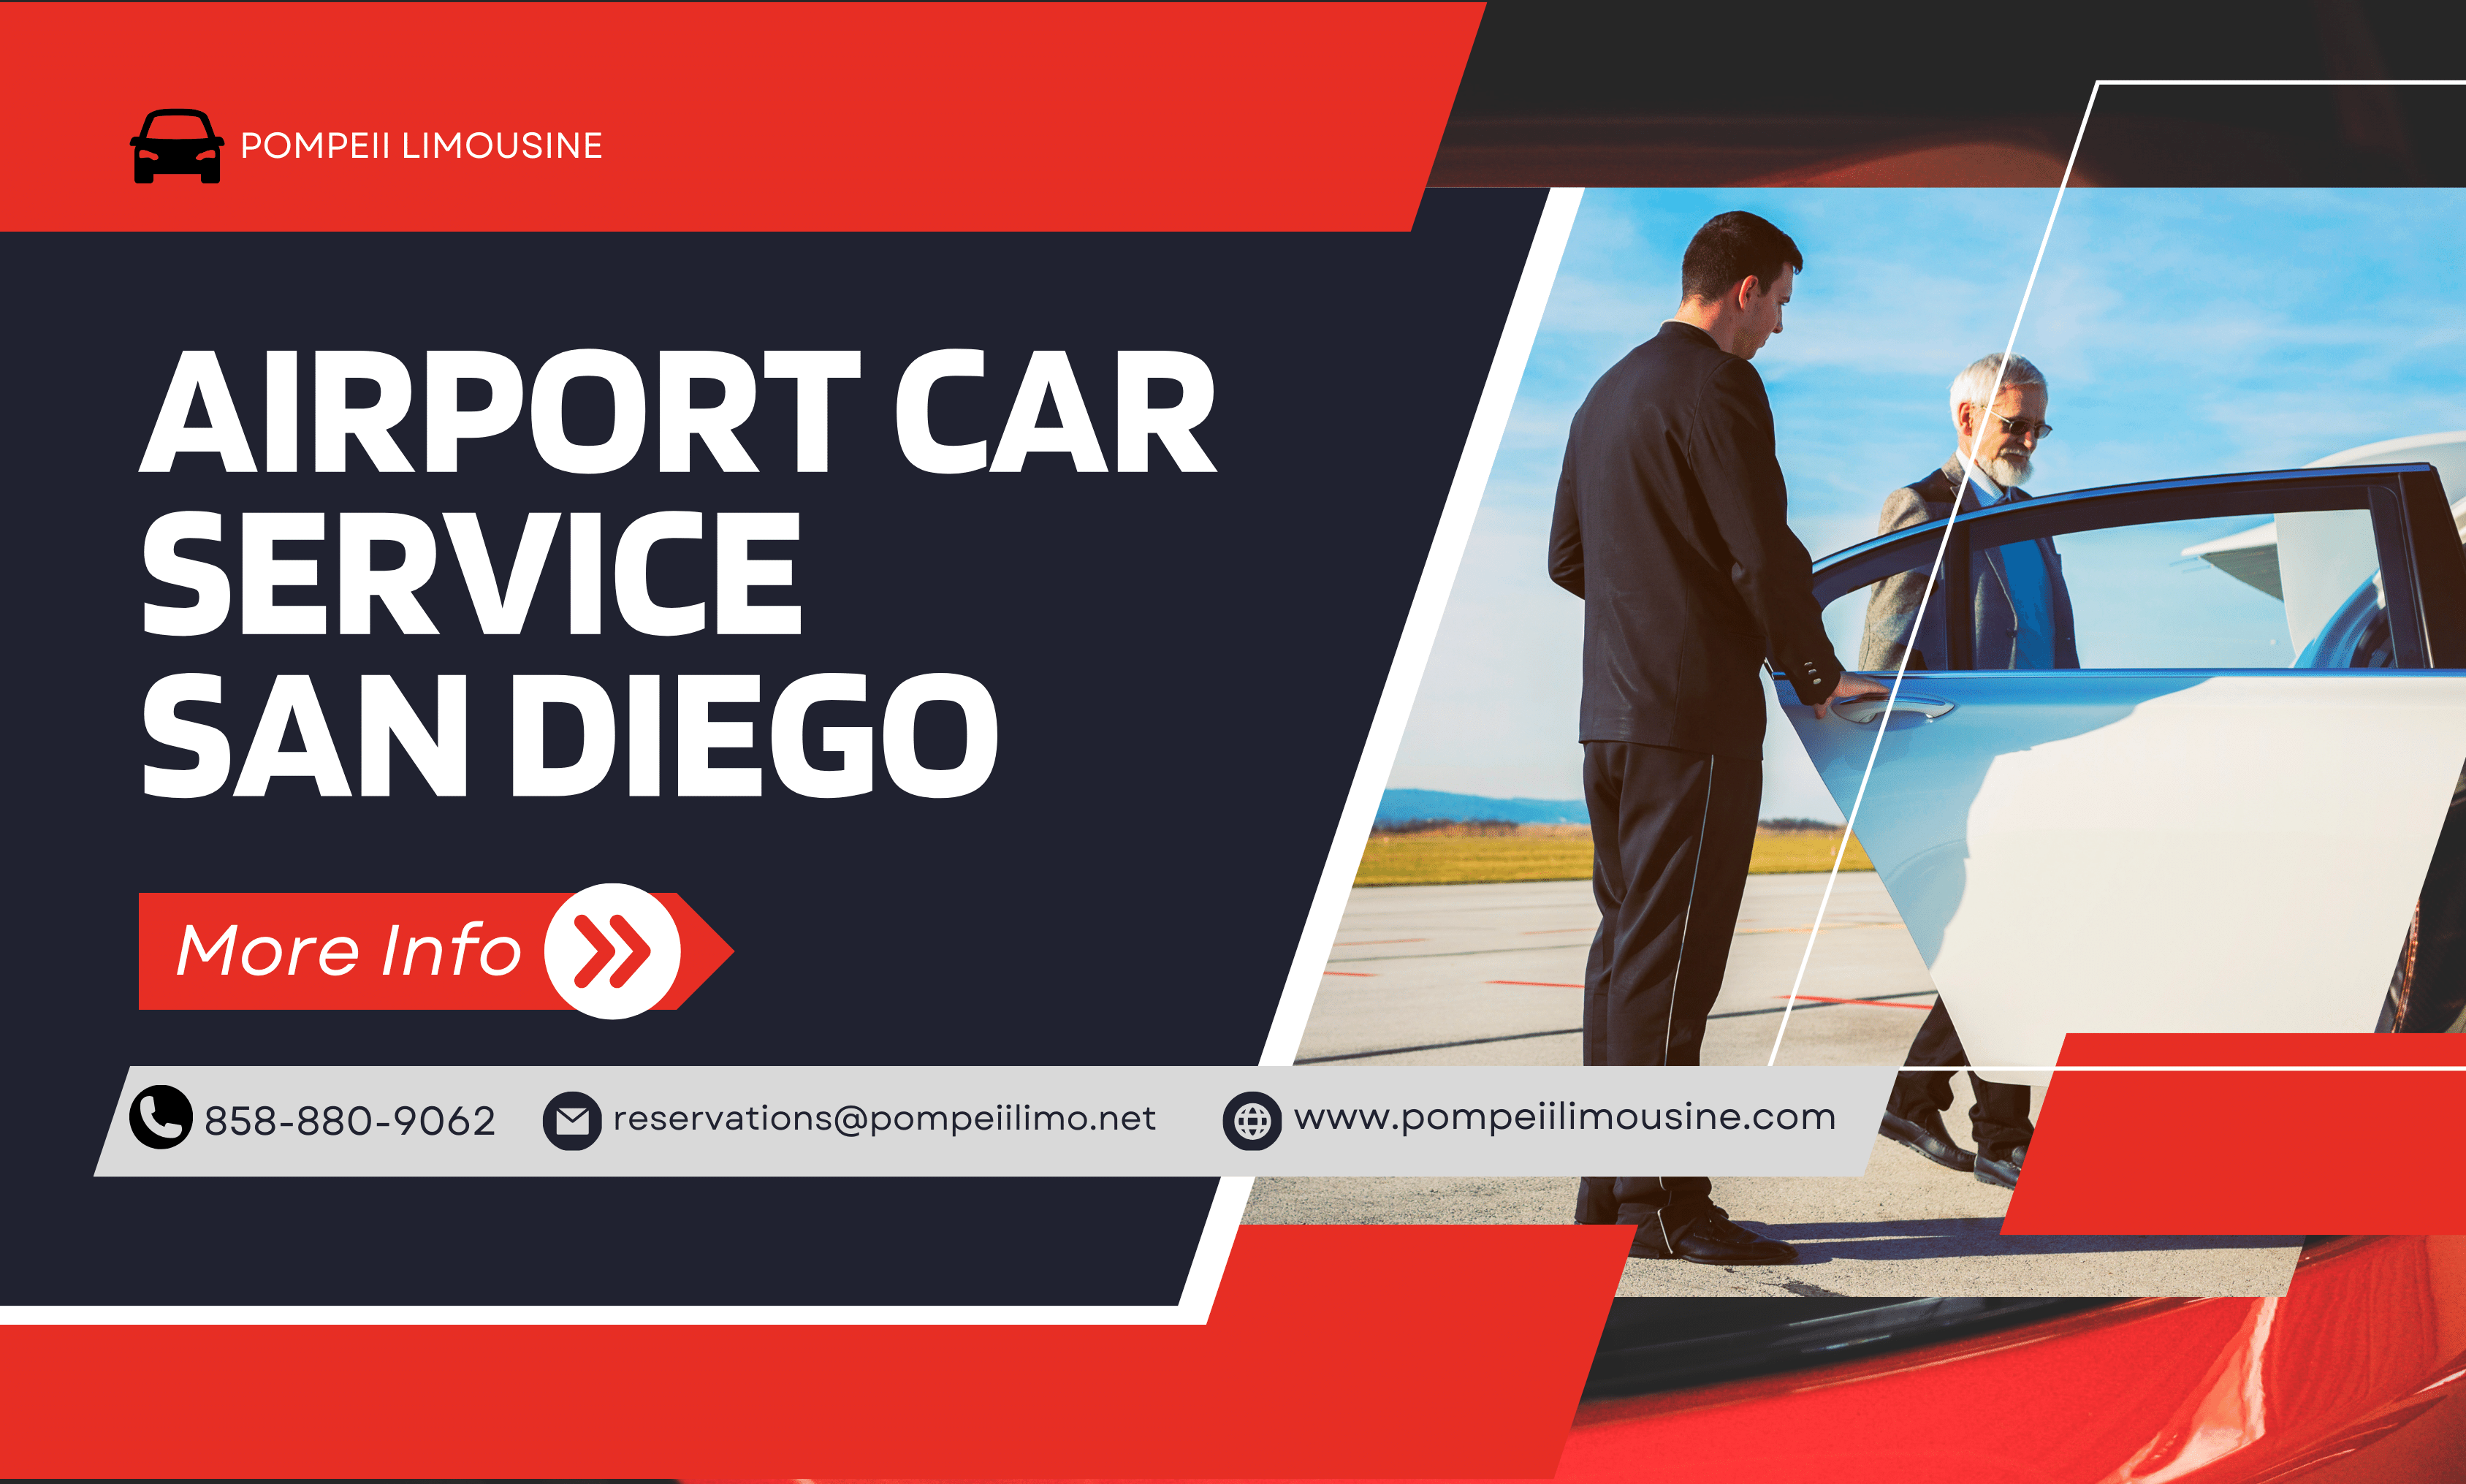 Why Airport Car Service San Diego is the #1 Choice for Savvy Travelers